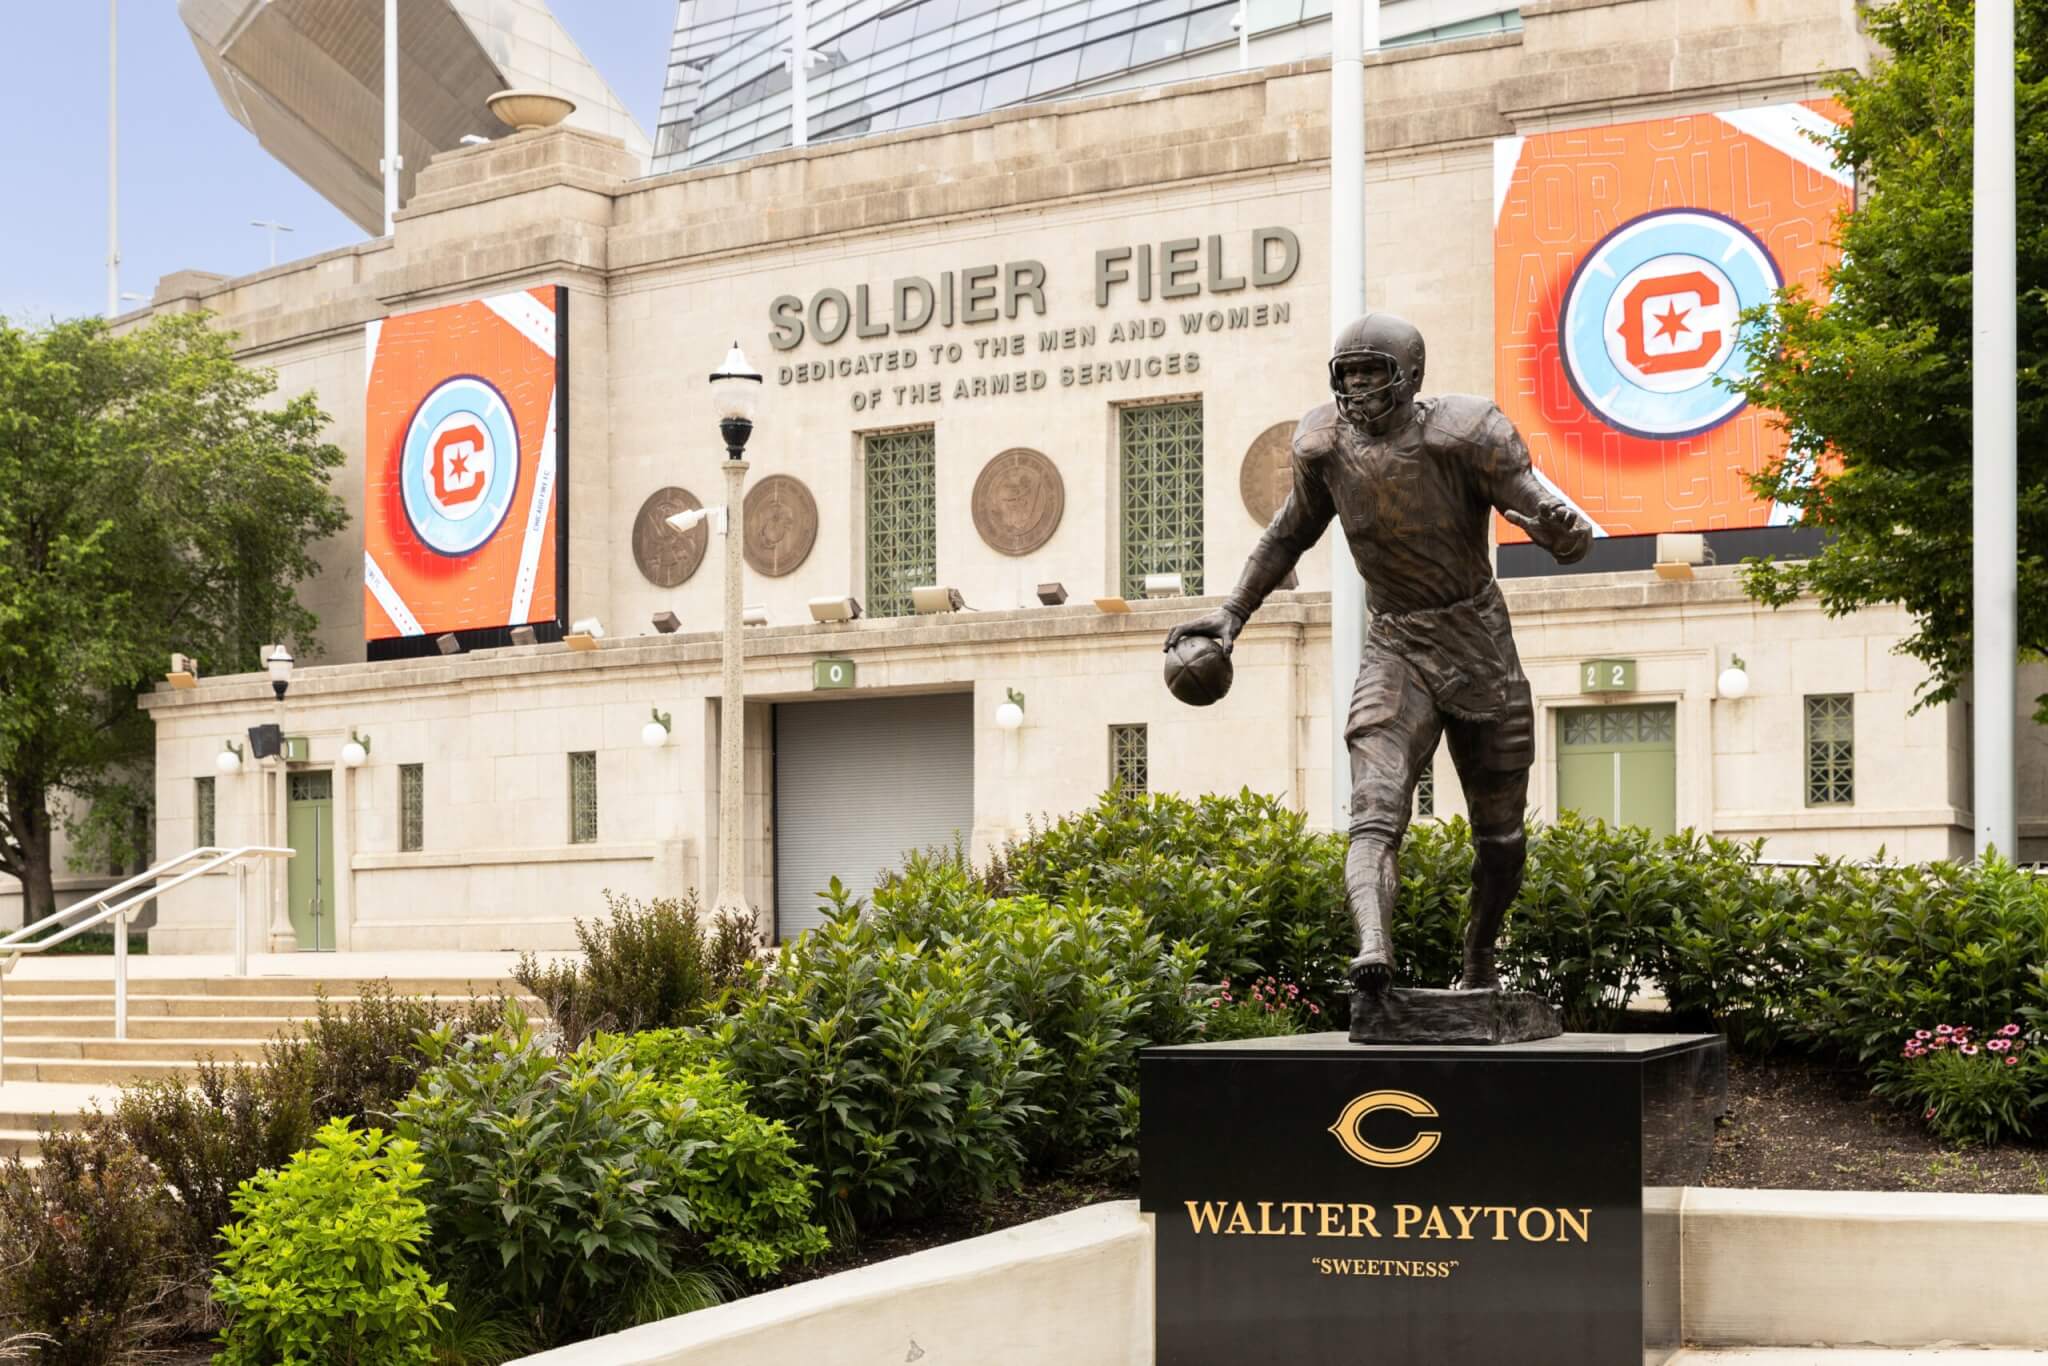 Walter Payton statue outside of Soldier Field, home to the Chicago Bears